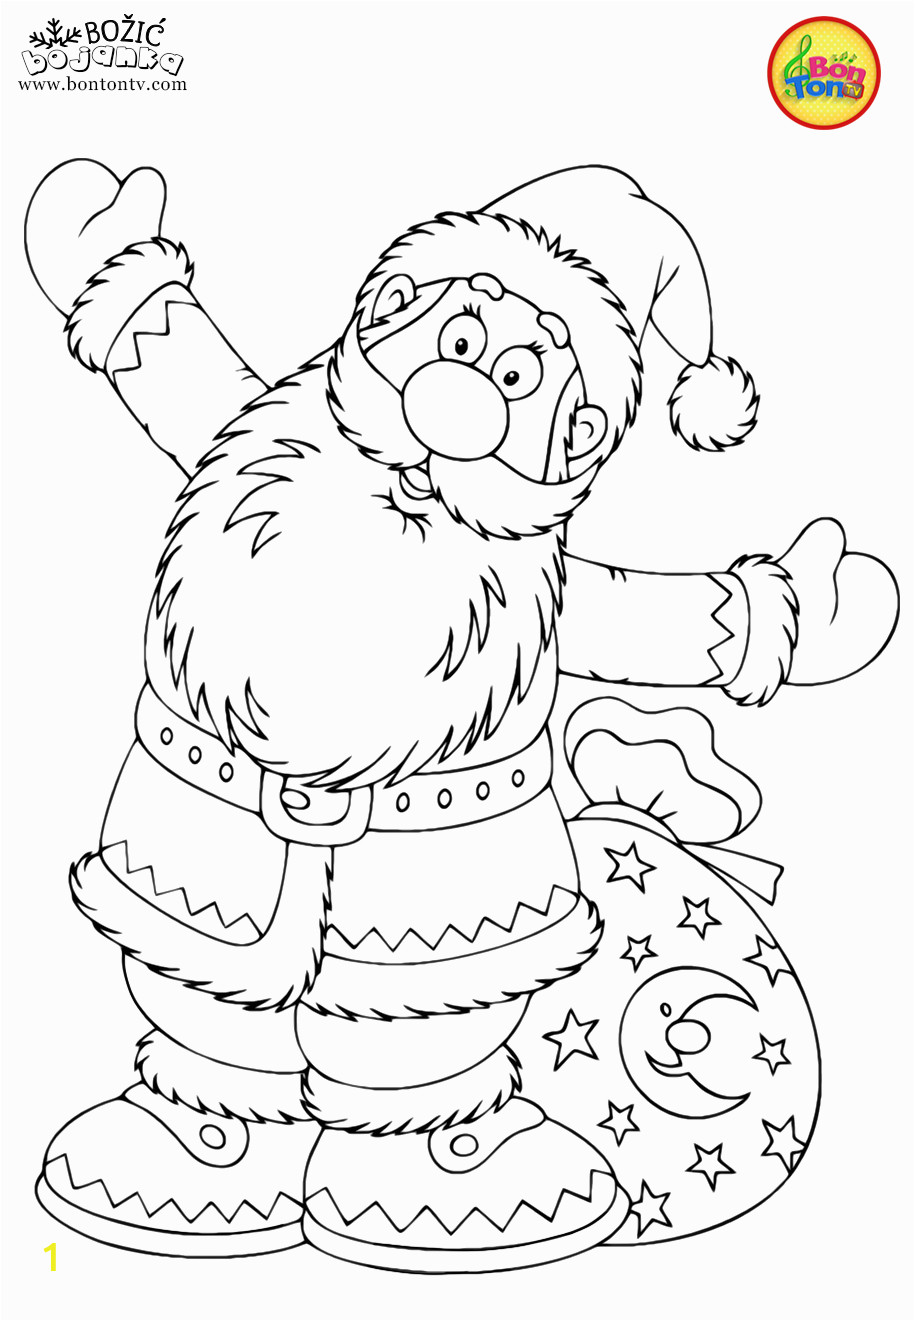 Coloring Pages Santa Claus Printable Christmas Coloring Pages BoÅ¾iÄ Bojanke Za Djecu Free